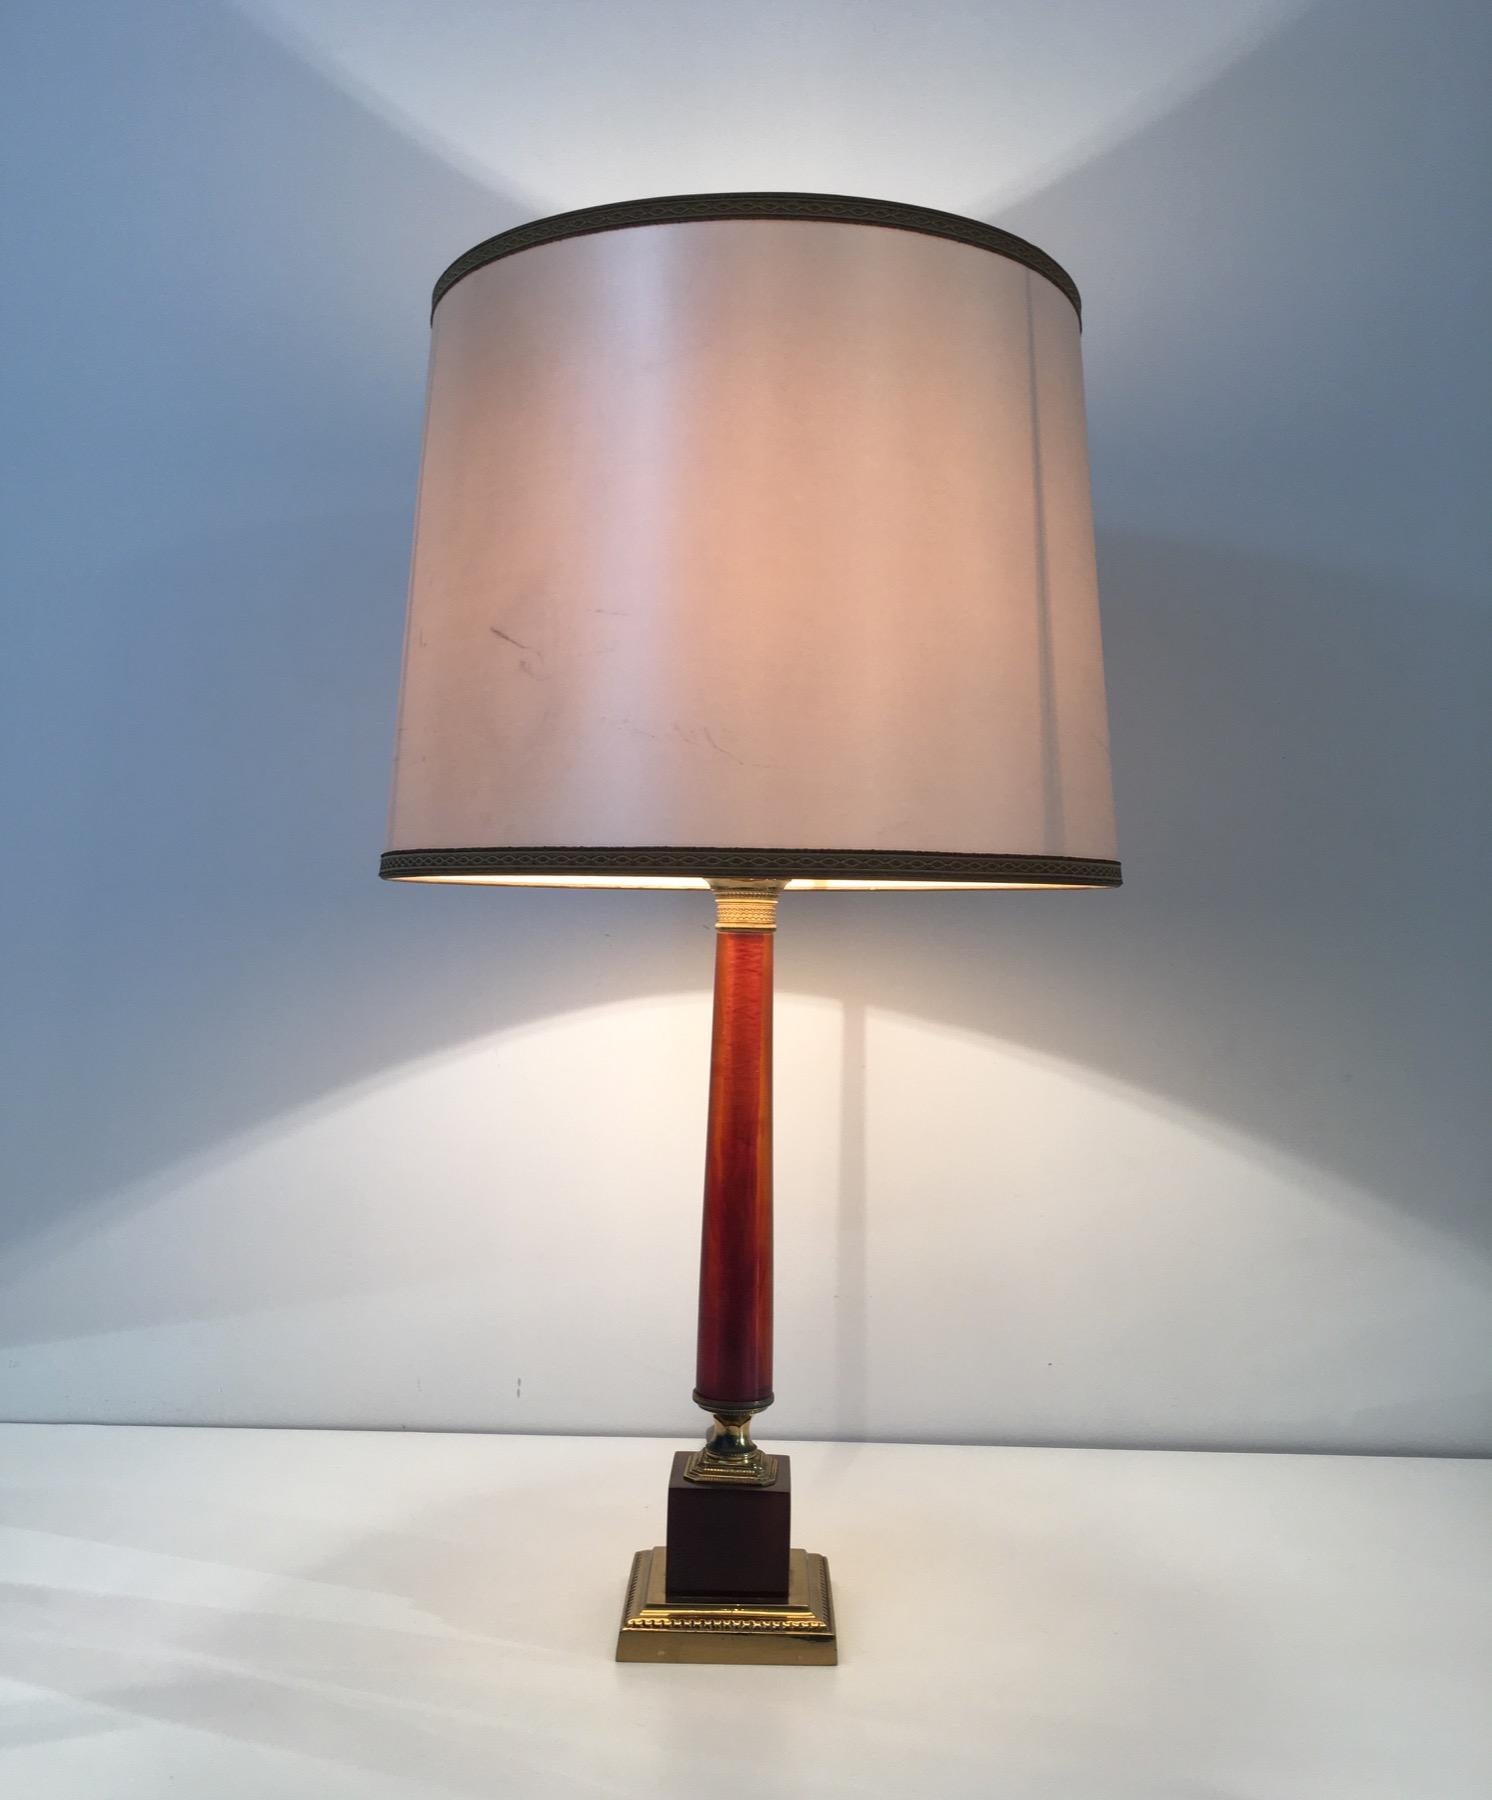 Elegant Red Celluloid and Brass Table Lamp, French, circa 1950 For Sale 5